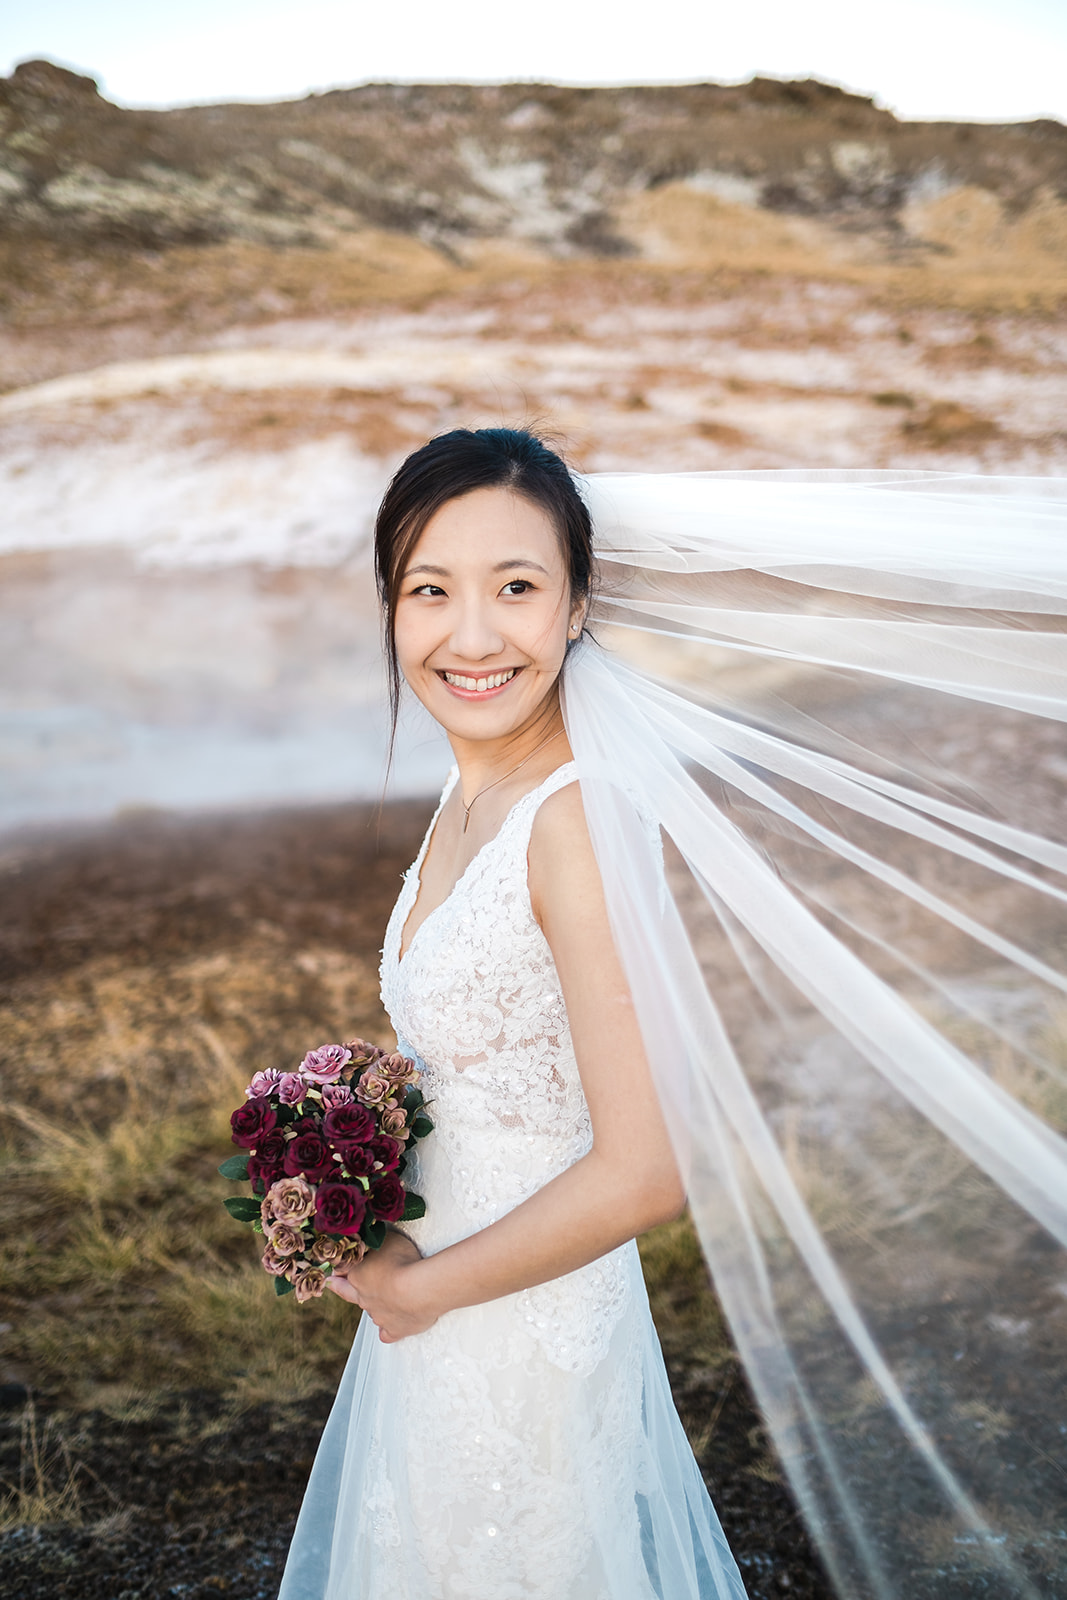 terrific portrait of an Asian bride at Seltún in Iceland